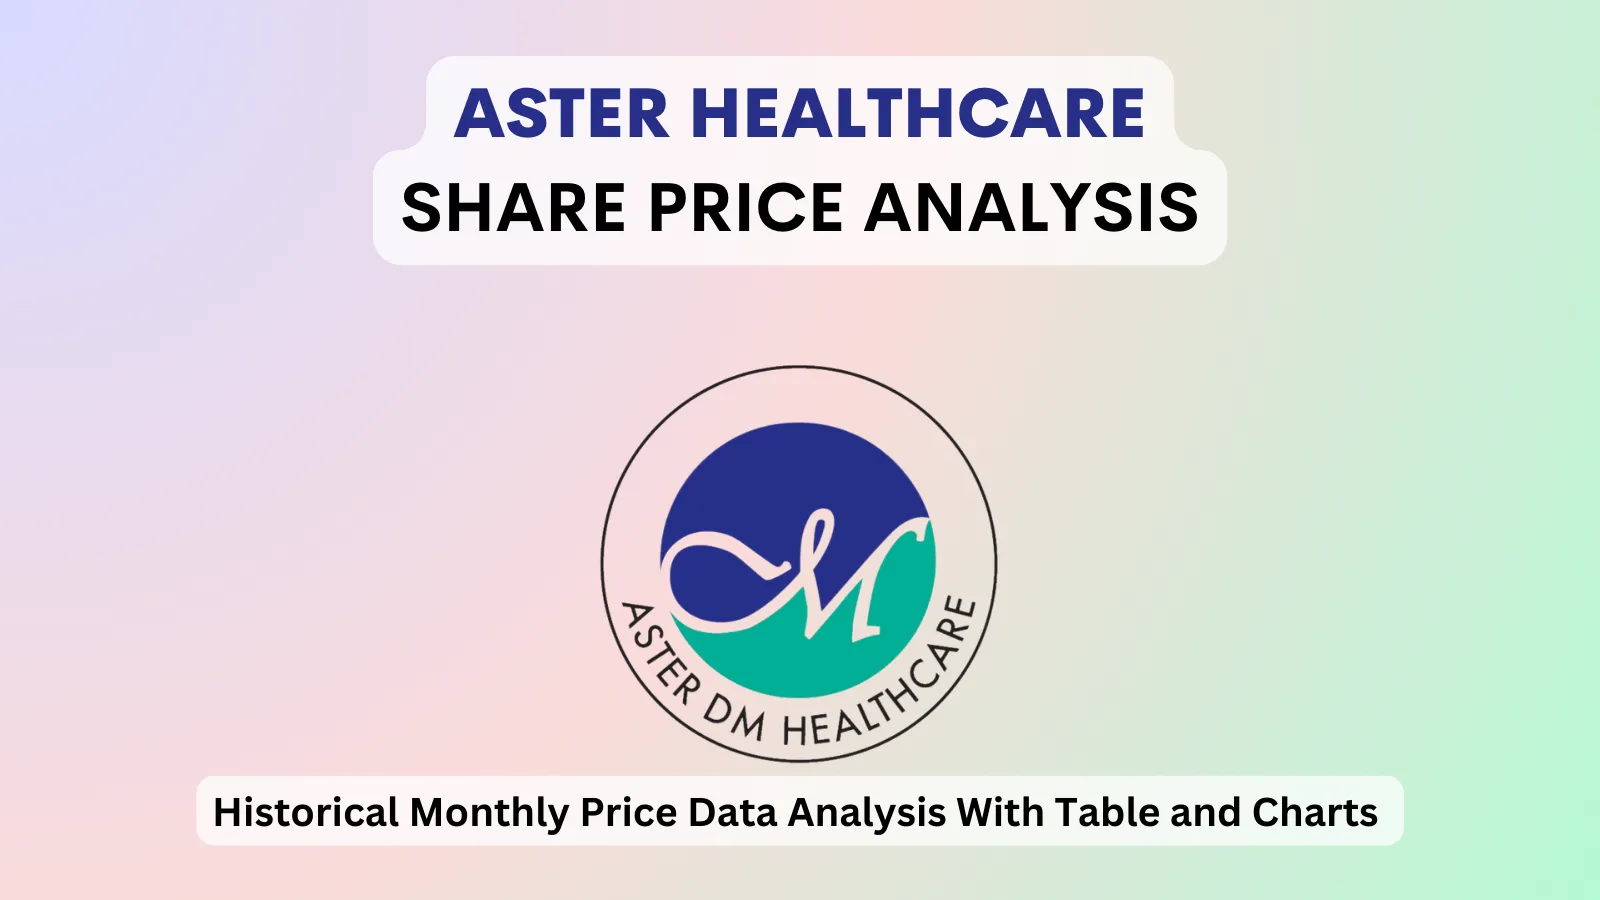 Aster Healthcare share price analysis